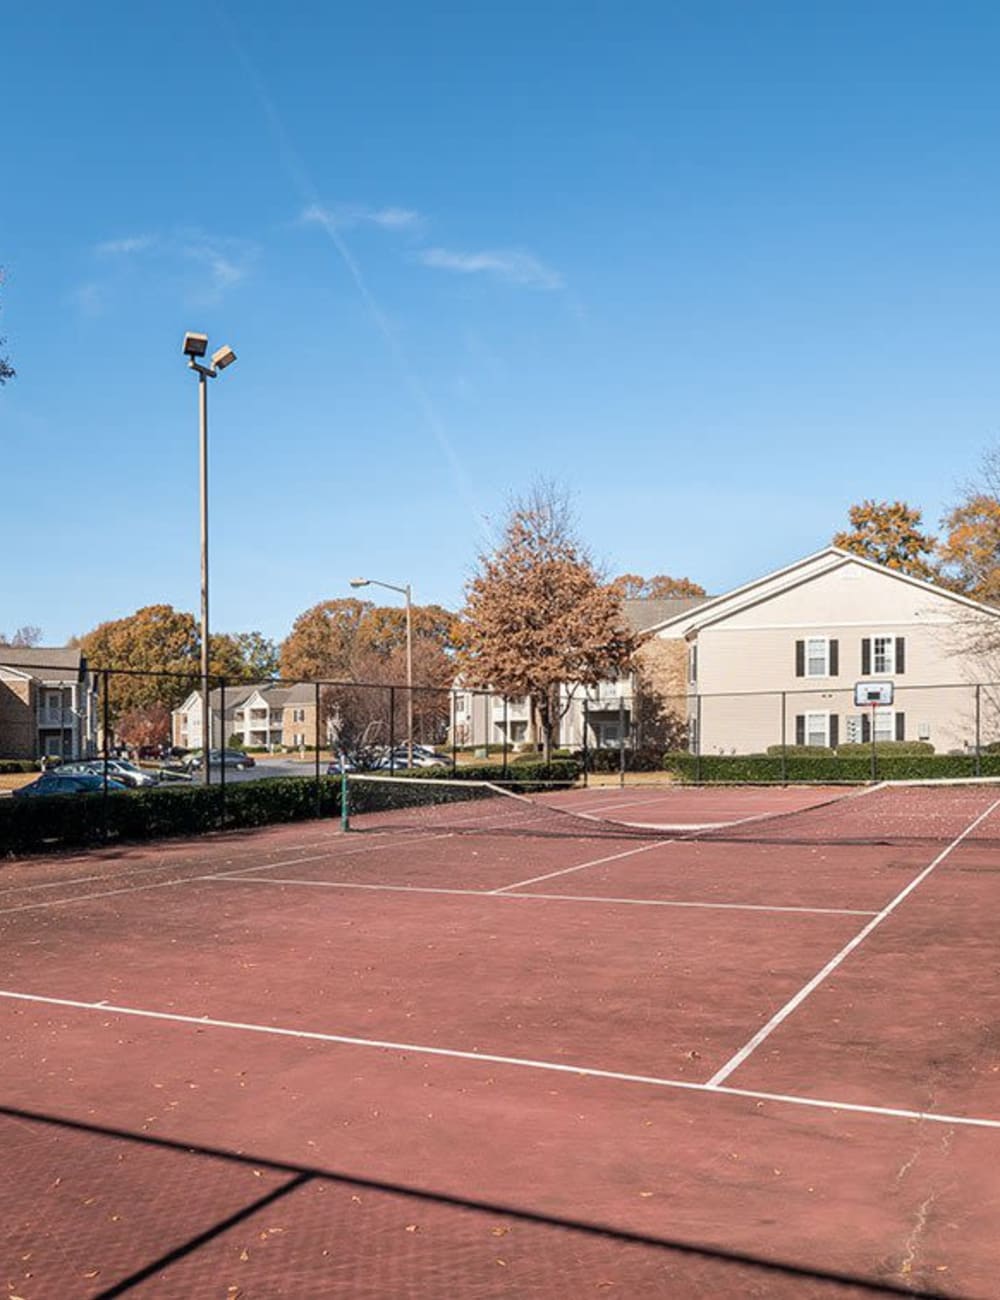 An outdoor tennis court for residents at Brighton Park in Byron, Georgia